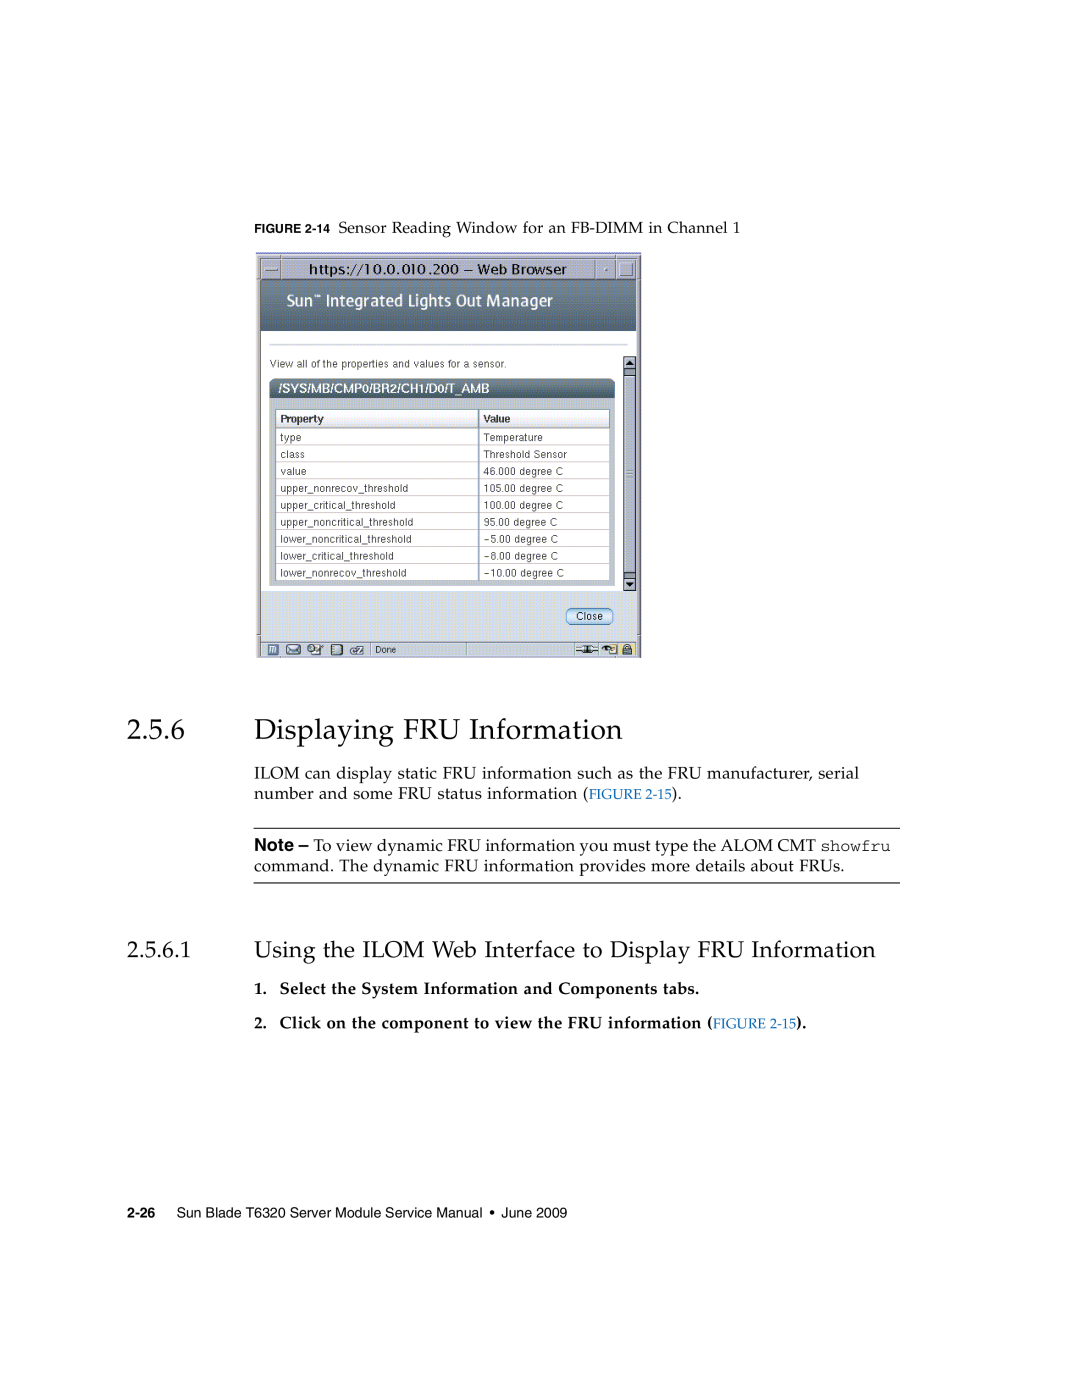 Sun Microsystems T6320 service manual Displaying FRU Information, Using the ILOM Web Interface to Display FRU Information 